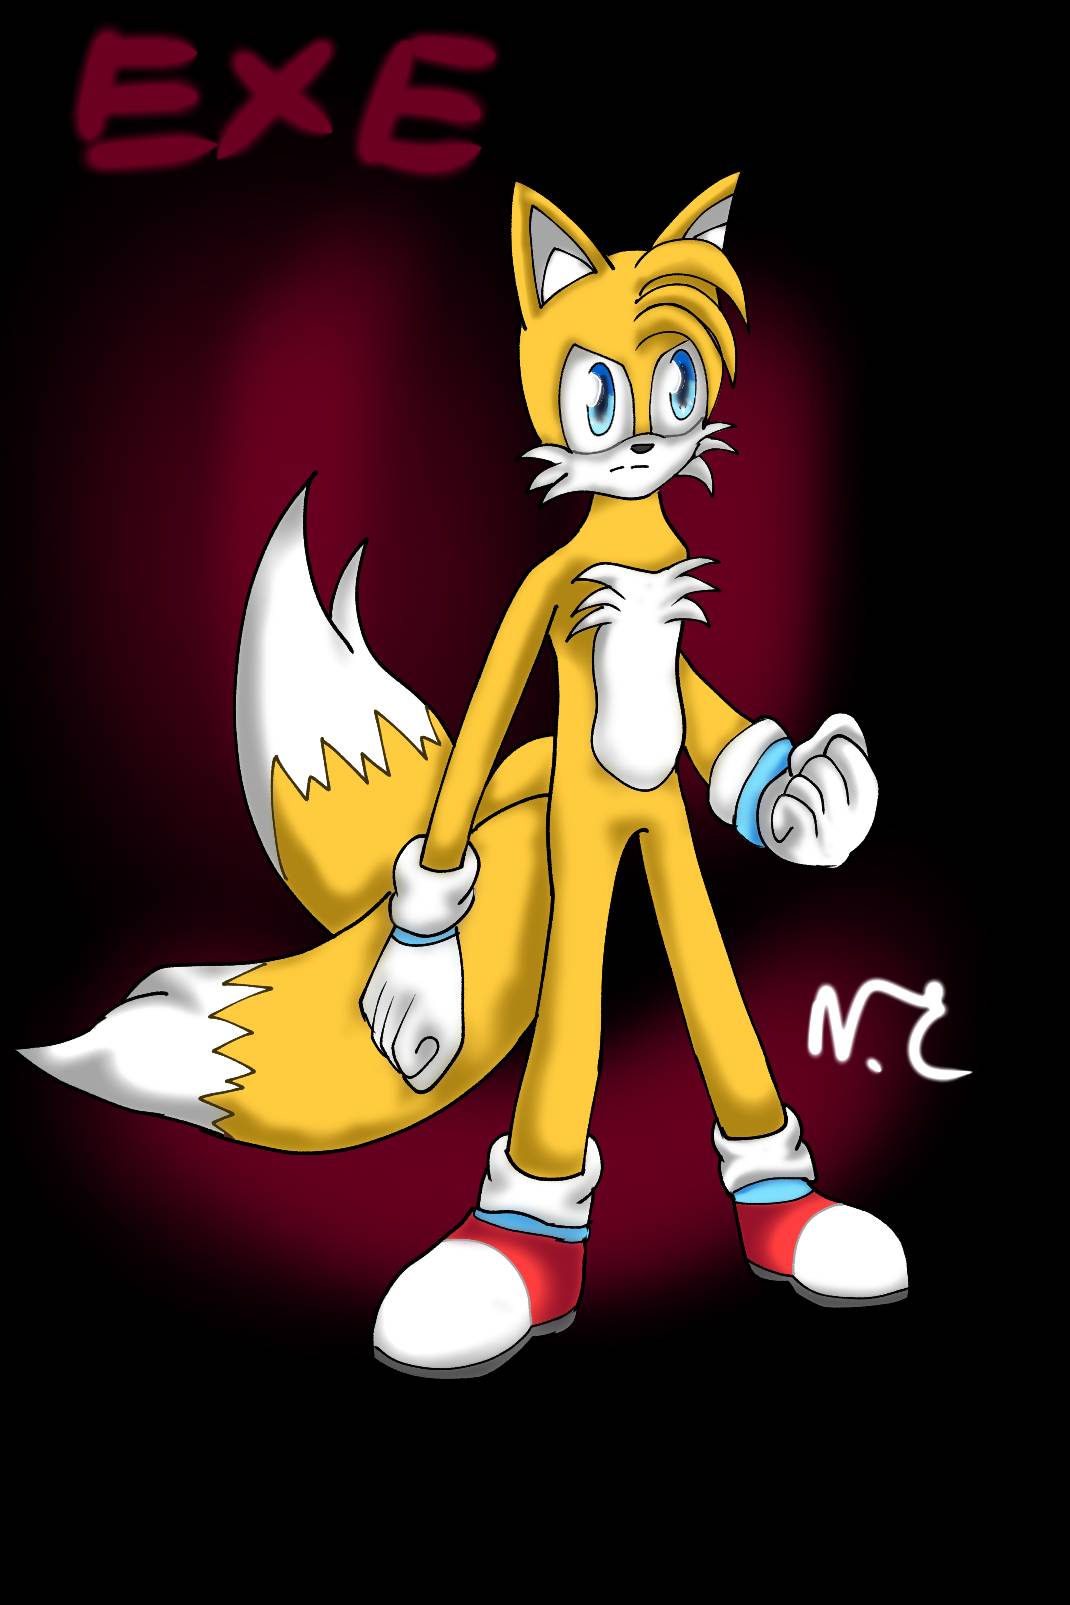 Tails.exe by coltonjamesbaca on DeviantArt